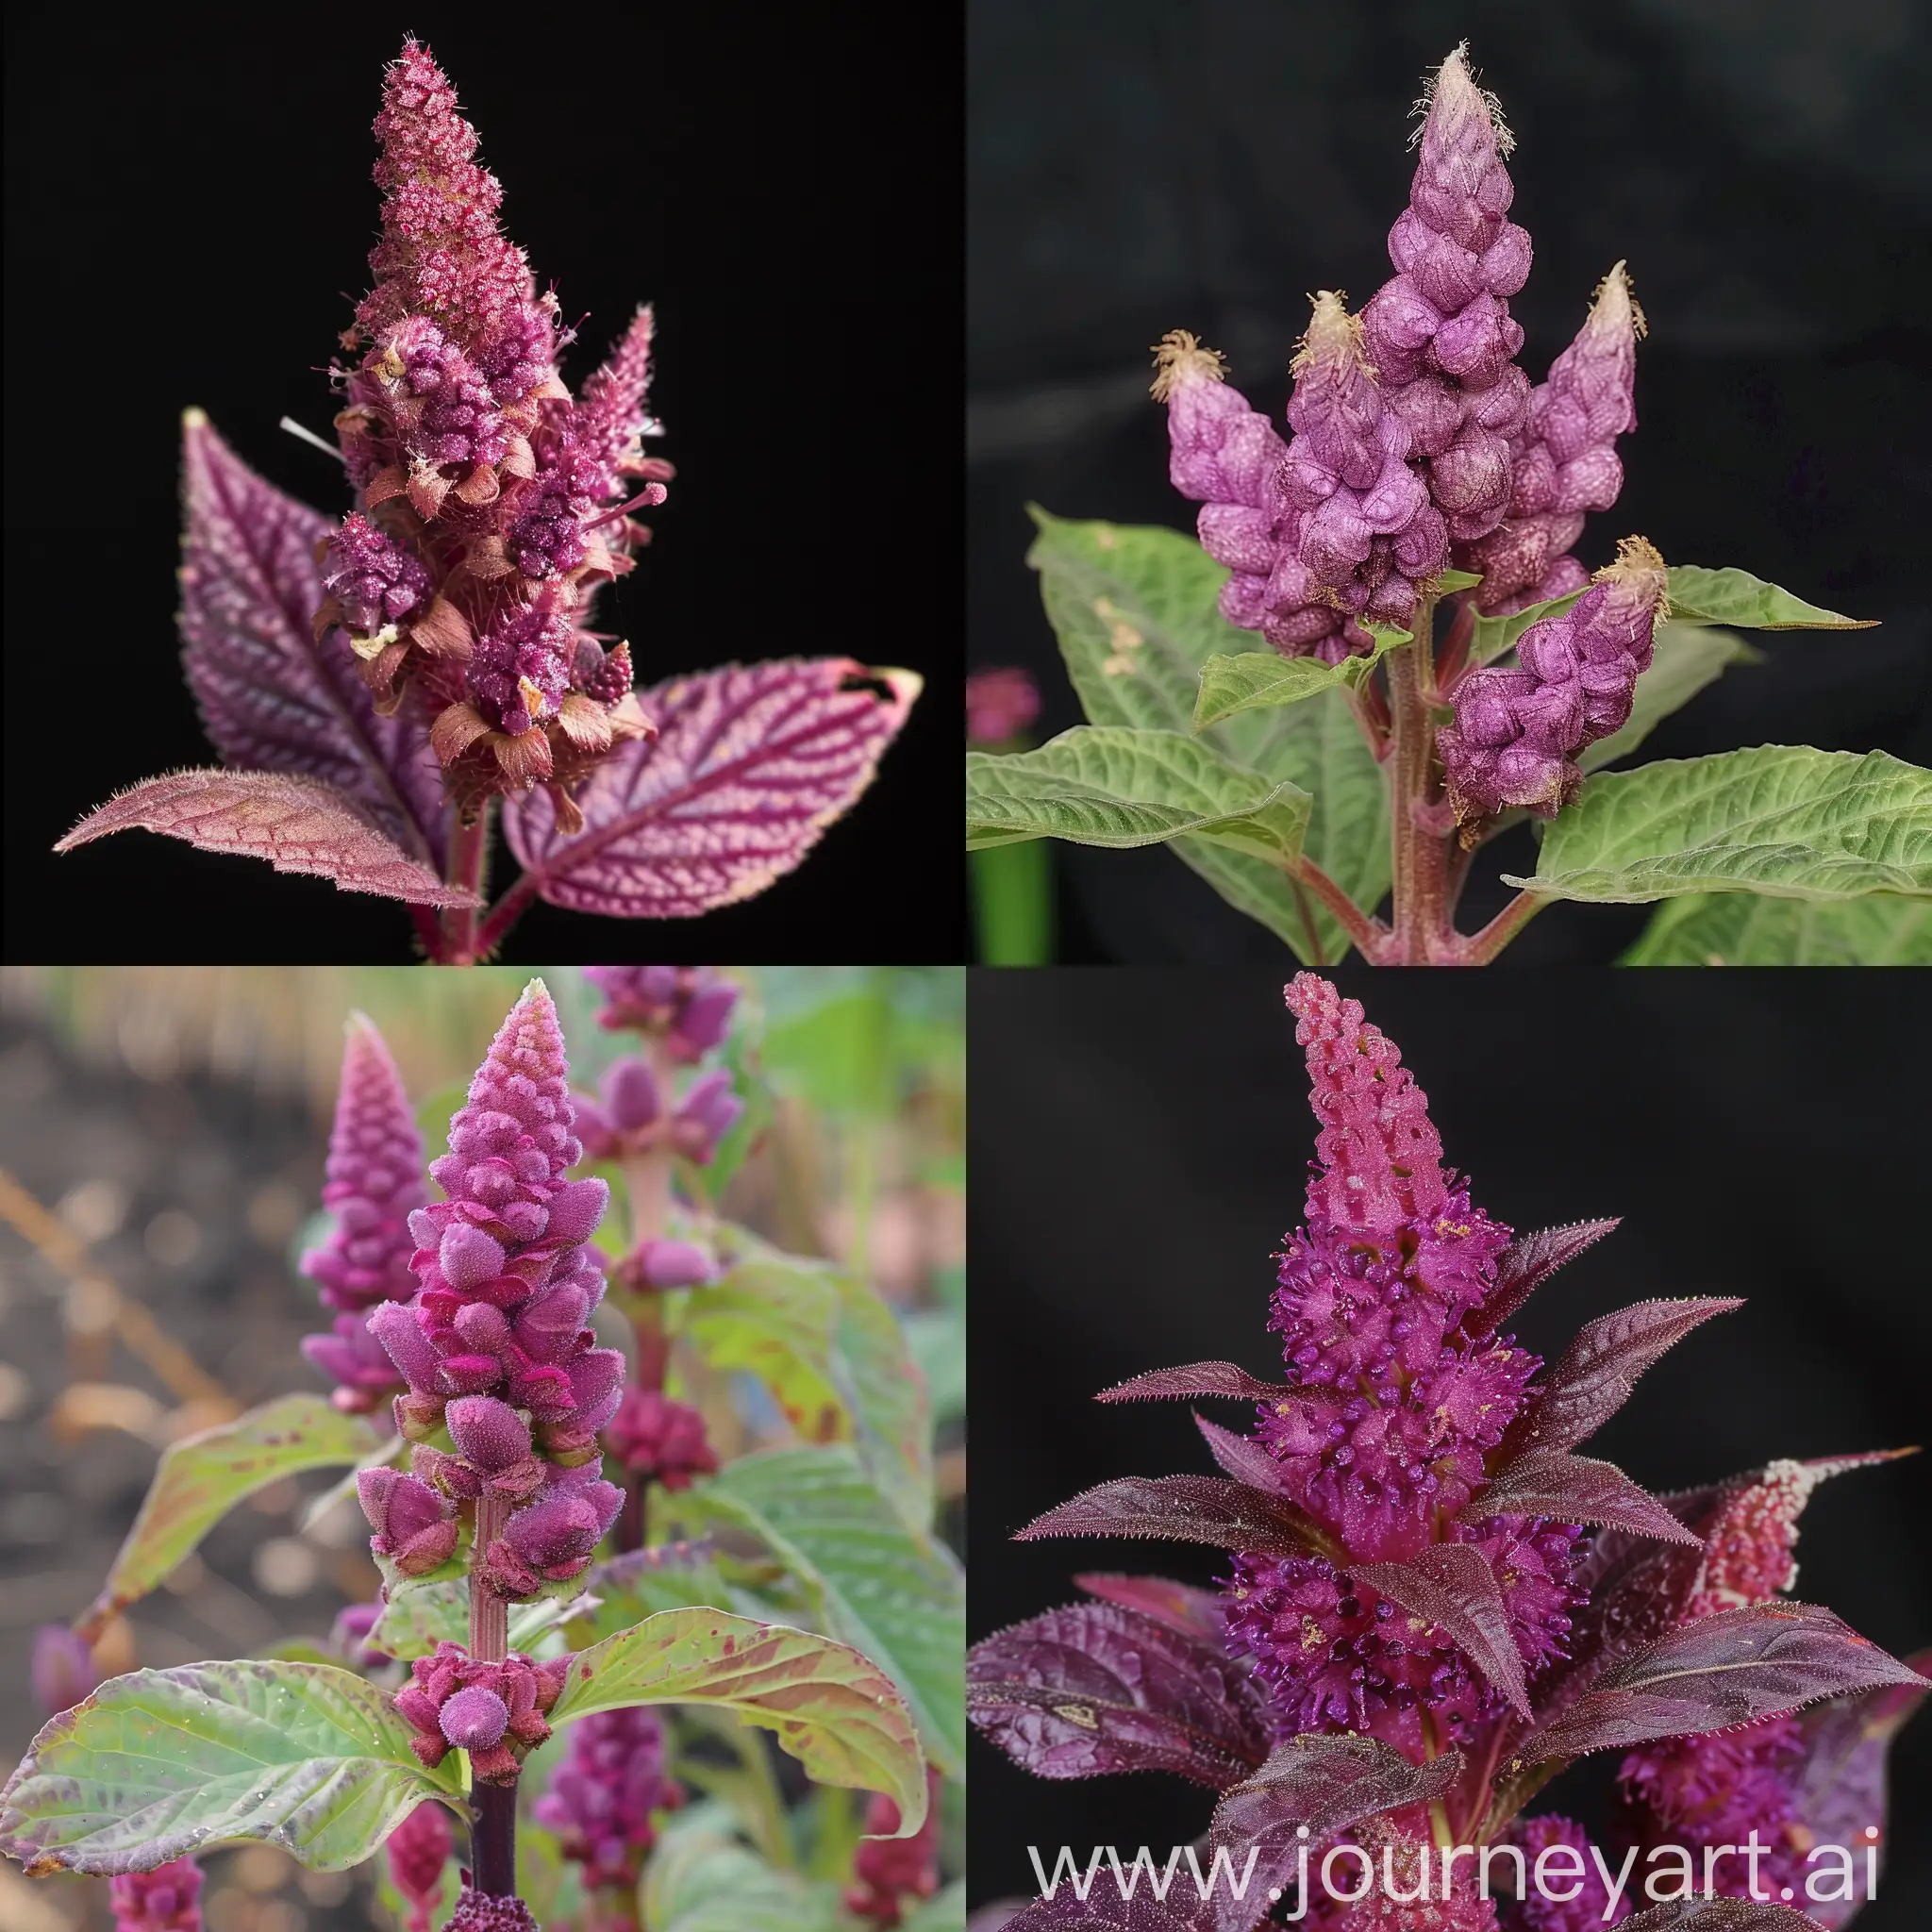 Dracocephalum is a plant member of the amaranth family